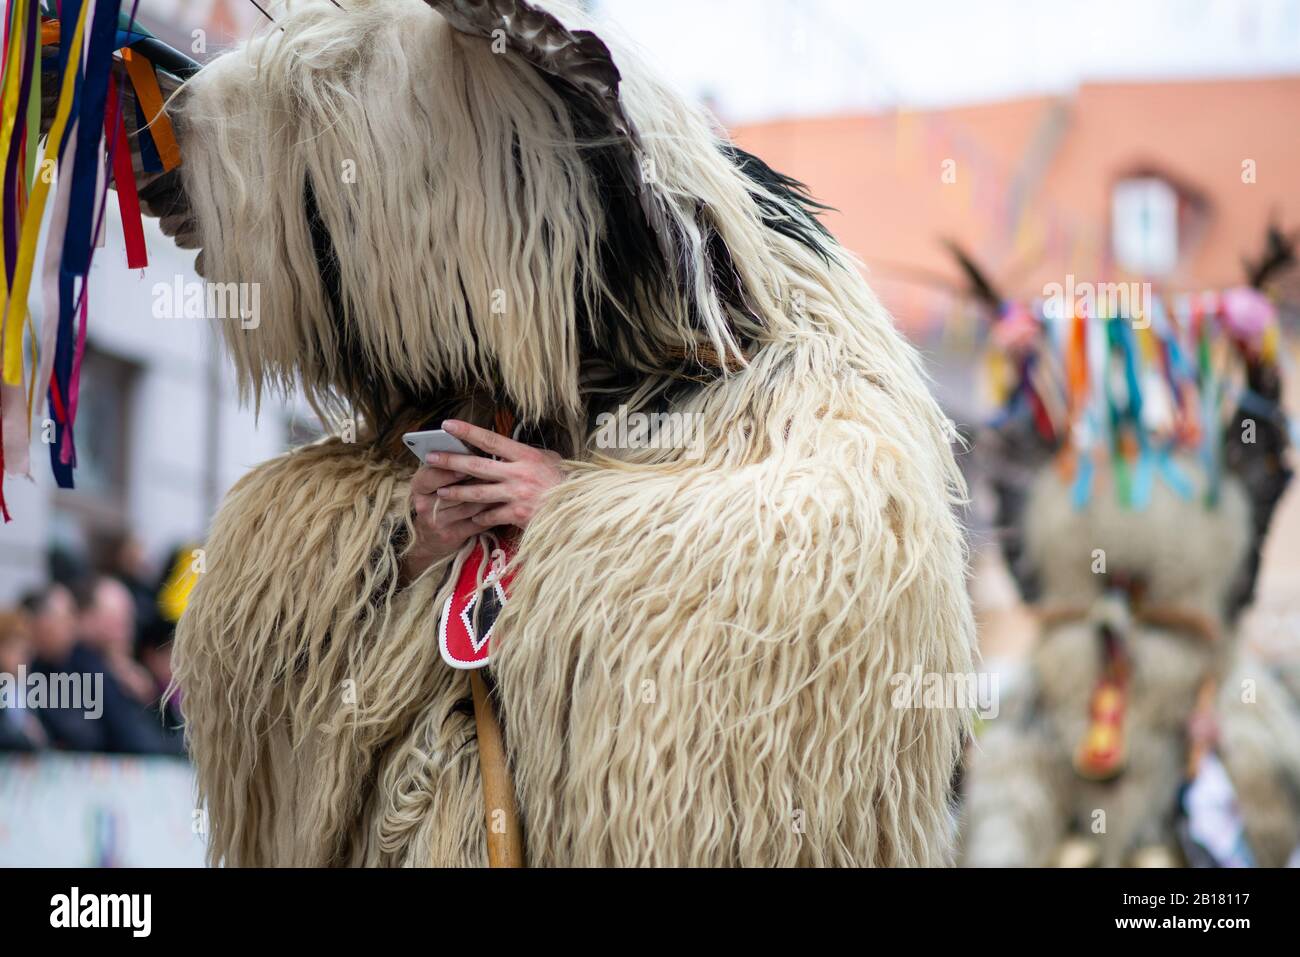 A man dressed as traditional Slovenian ethnographic character Kurent uses his phone during the Kurentovanje 60th International Carnival Festival.Kurentovanje is Slovenia's main spring cultural and ethnographic festival of national importance, the richest international Pustovanje (Shrovetide celebration) in the land. The unique Ptuj carnival legacy, which is deeply rooted in the mystical pagan character of Kurent and many other characters, is combined with attractive local features throughout the festival, such as music, dance, fashionable local cuisine and high quality wines. In the midst of a Stock Photo